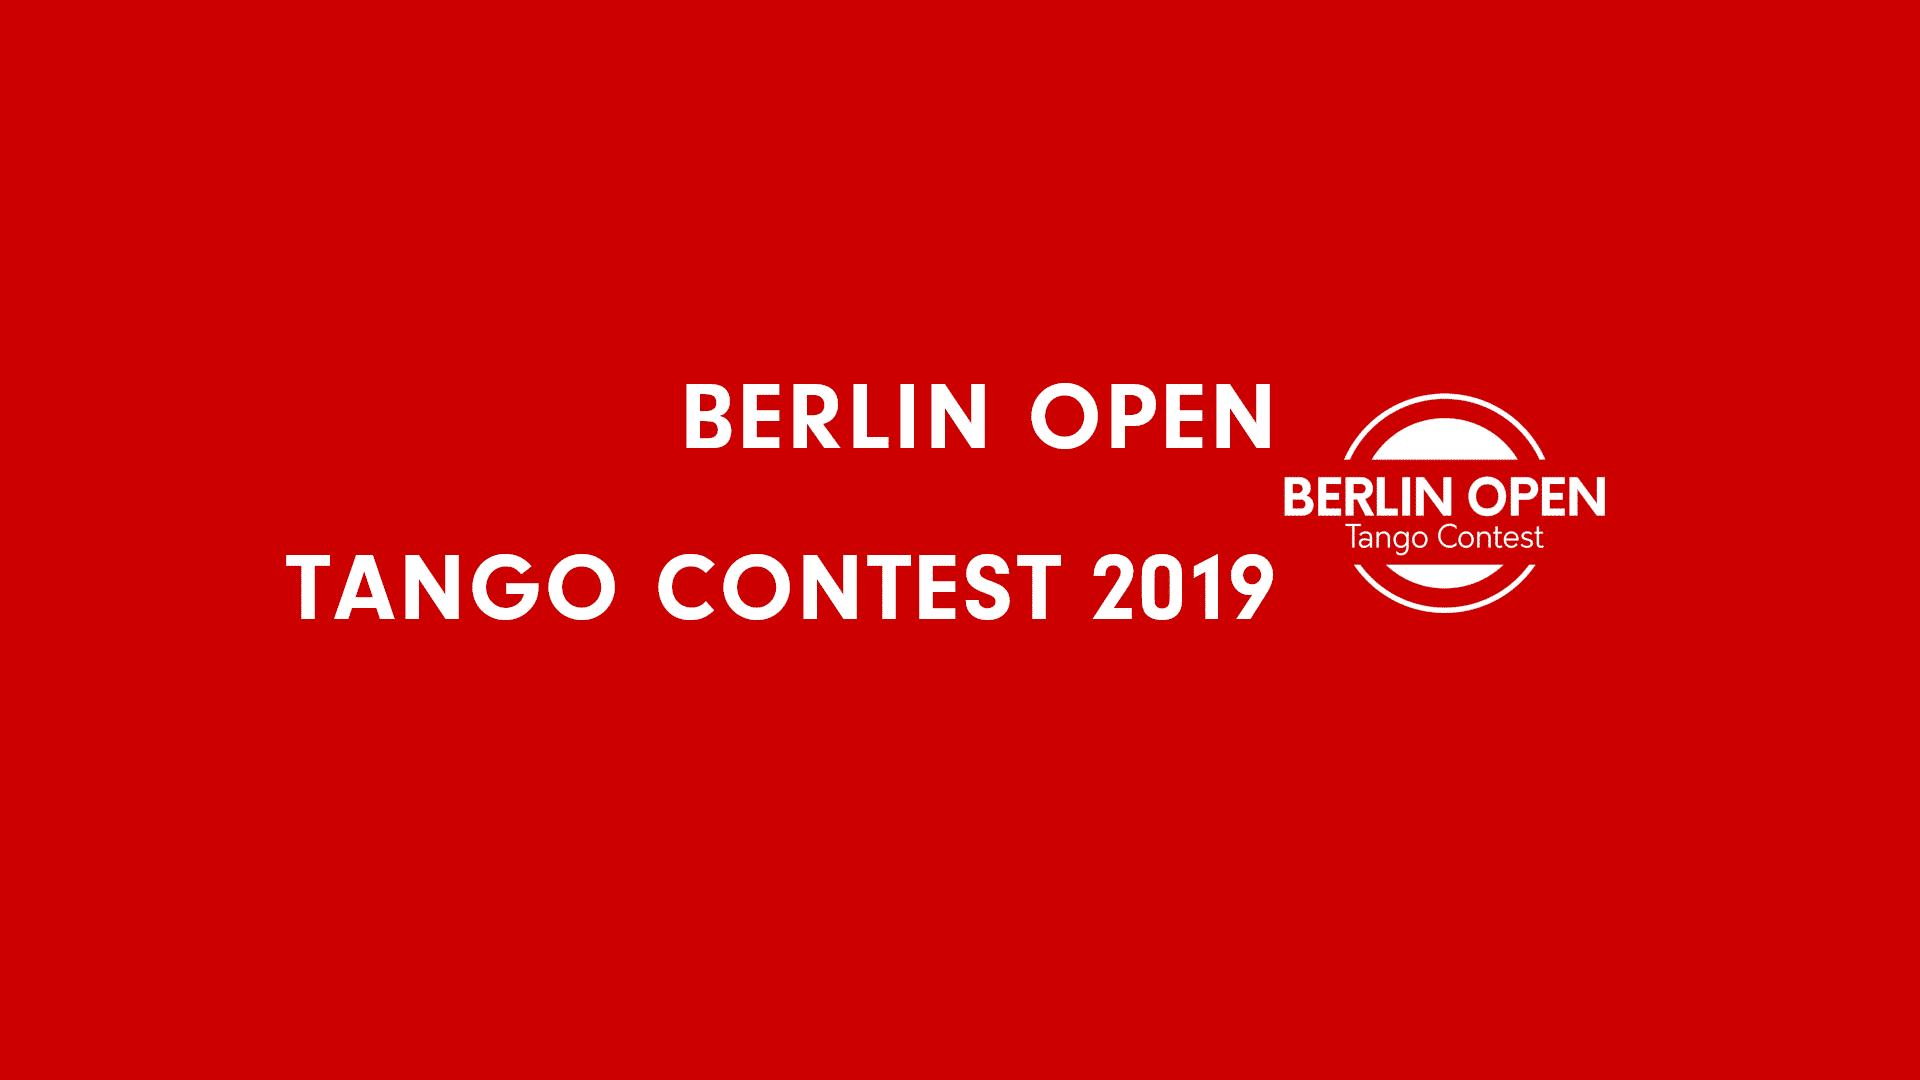 Berlin Open Tango Contest 2019 Preview Image